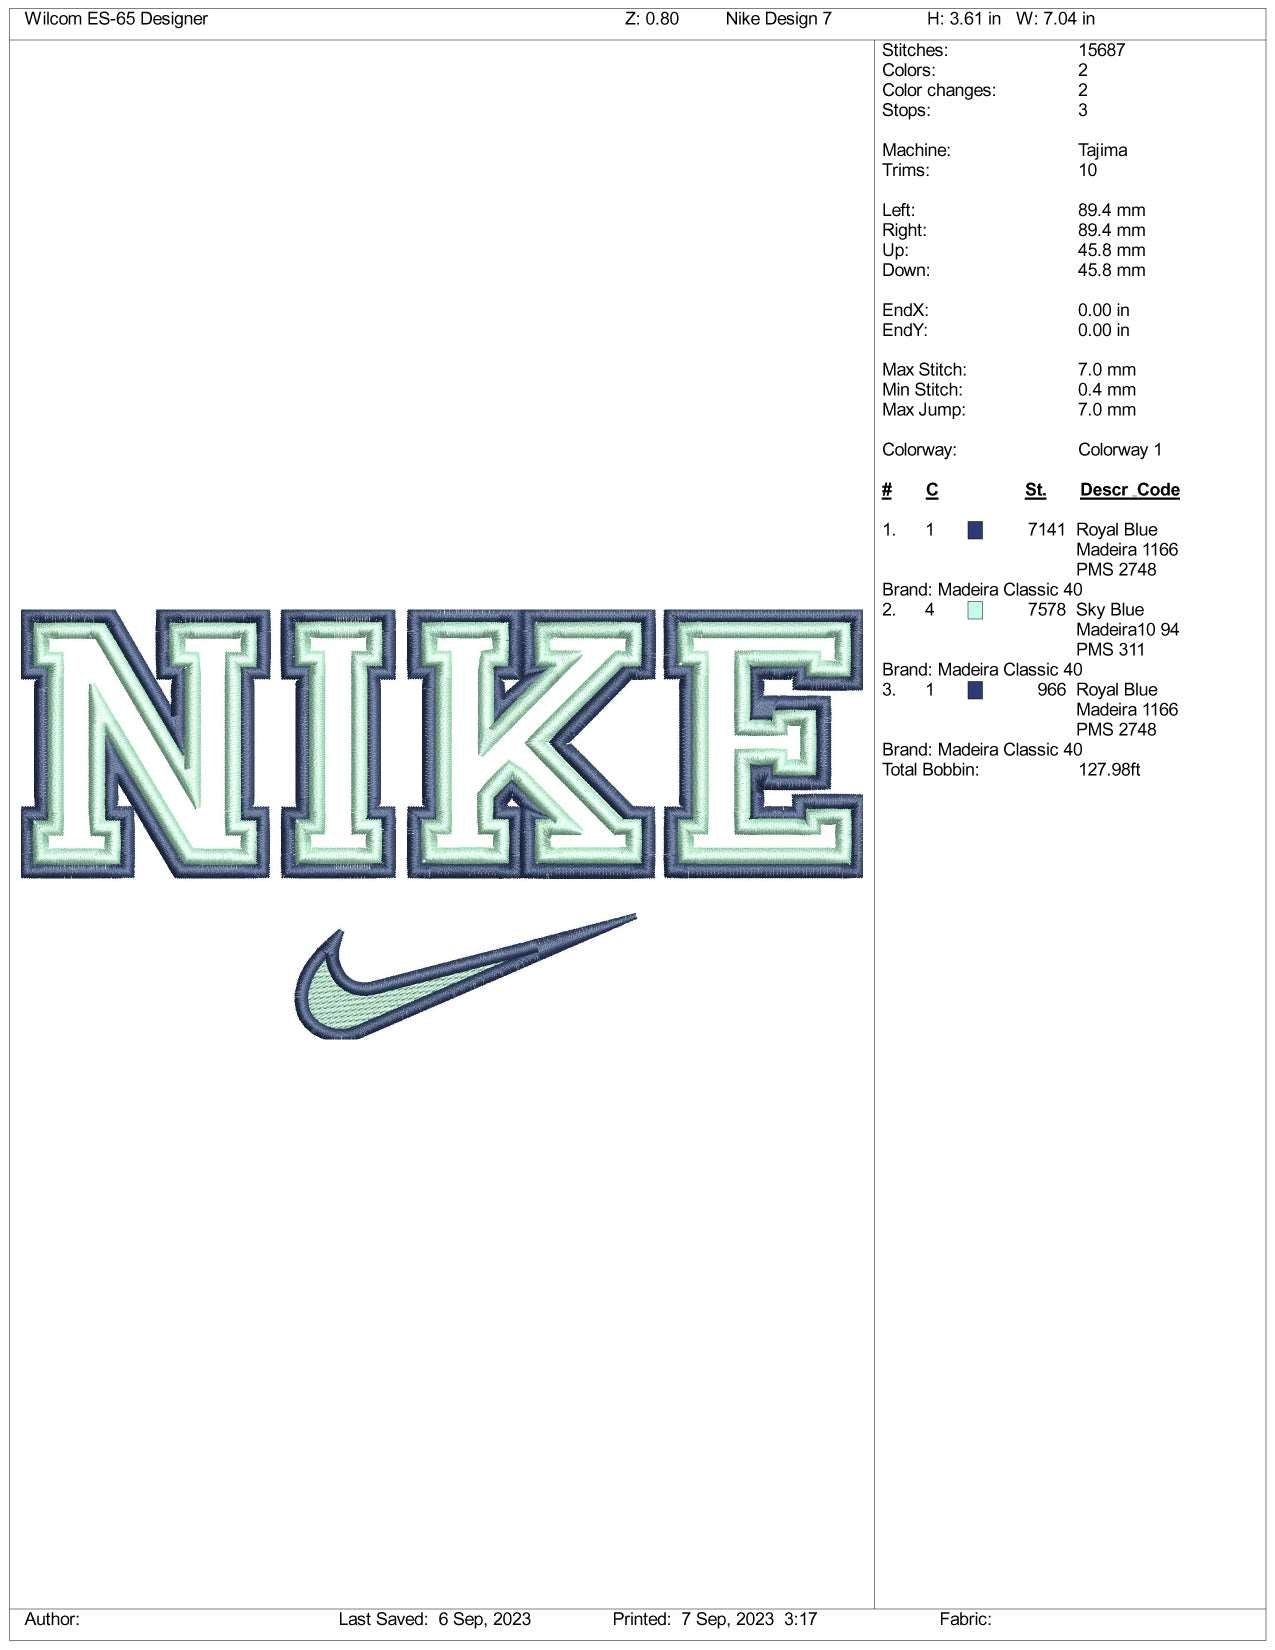 Nike v3 Embroidery Design Files - 3 Size's